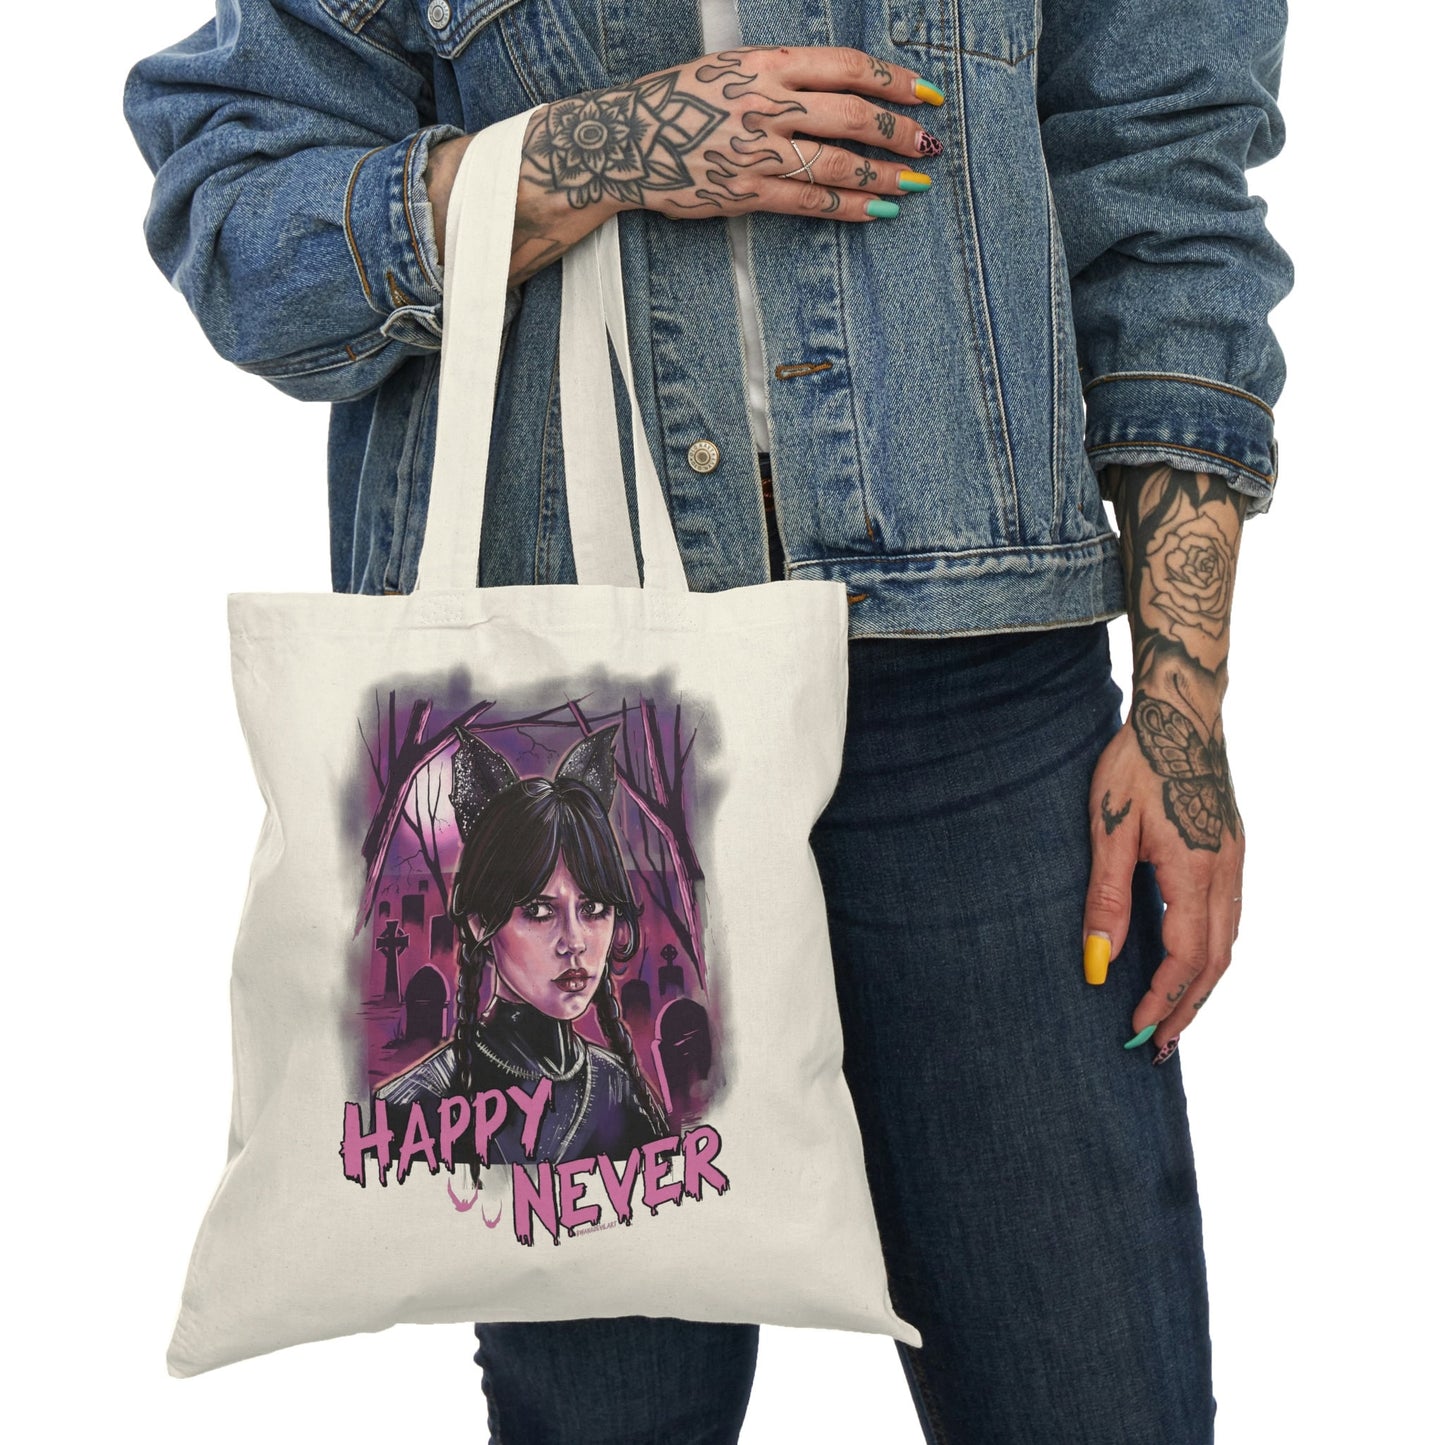 Wednesday Addams tote bag, Nevermore academy, Wednesday Addams tote bag, Goth book bag, Wednesday Addams grocery bag, Horror